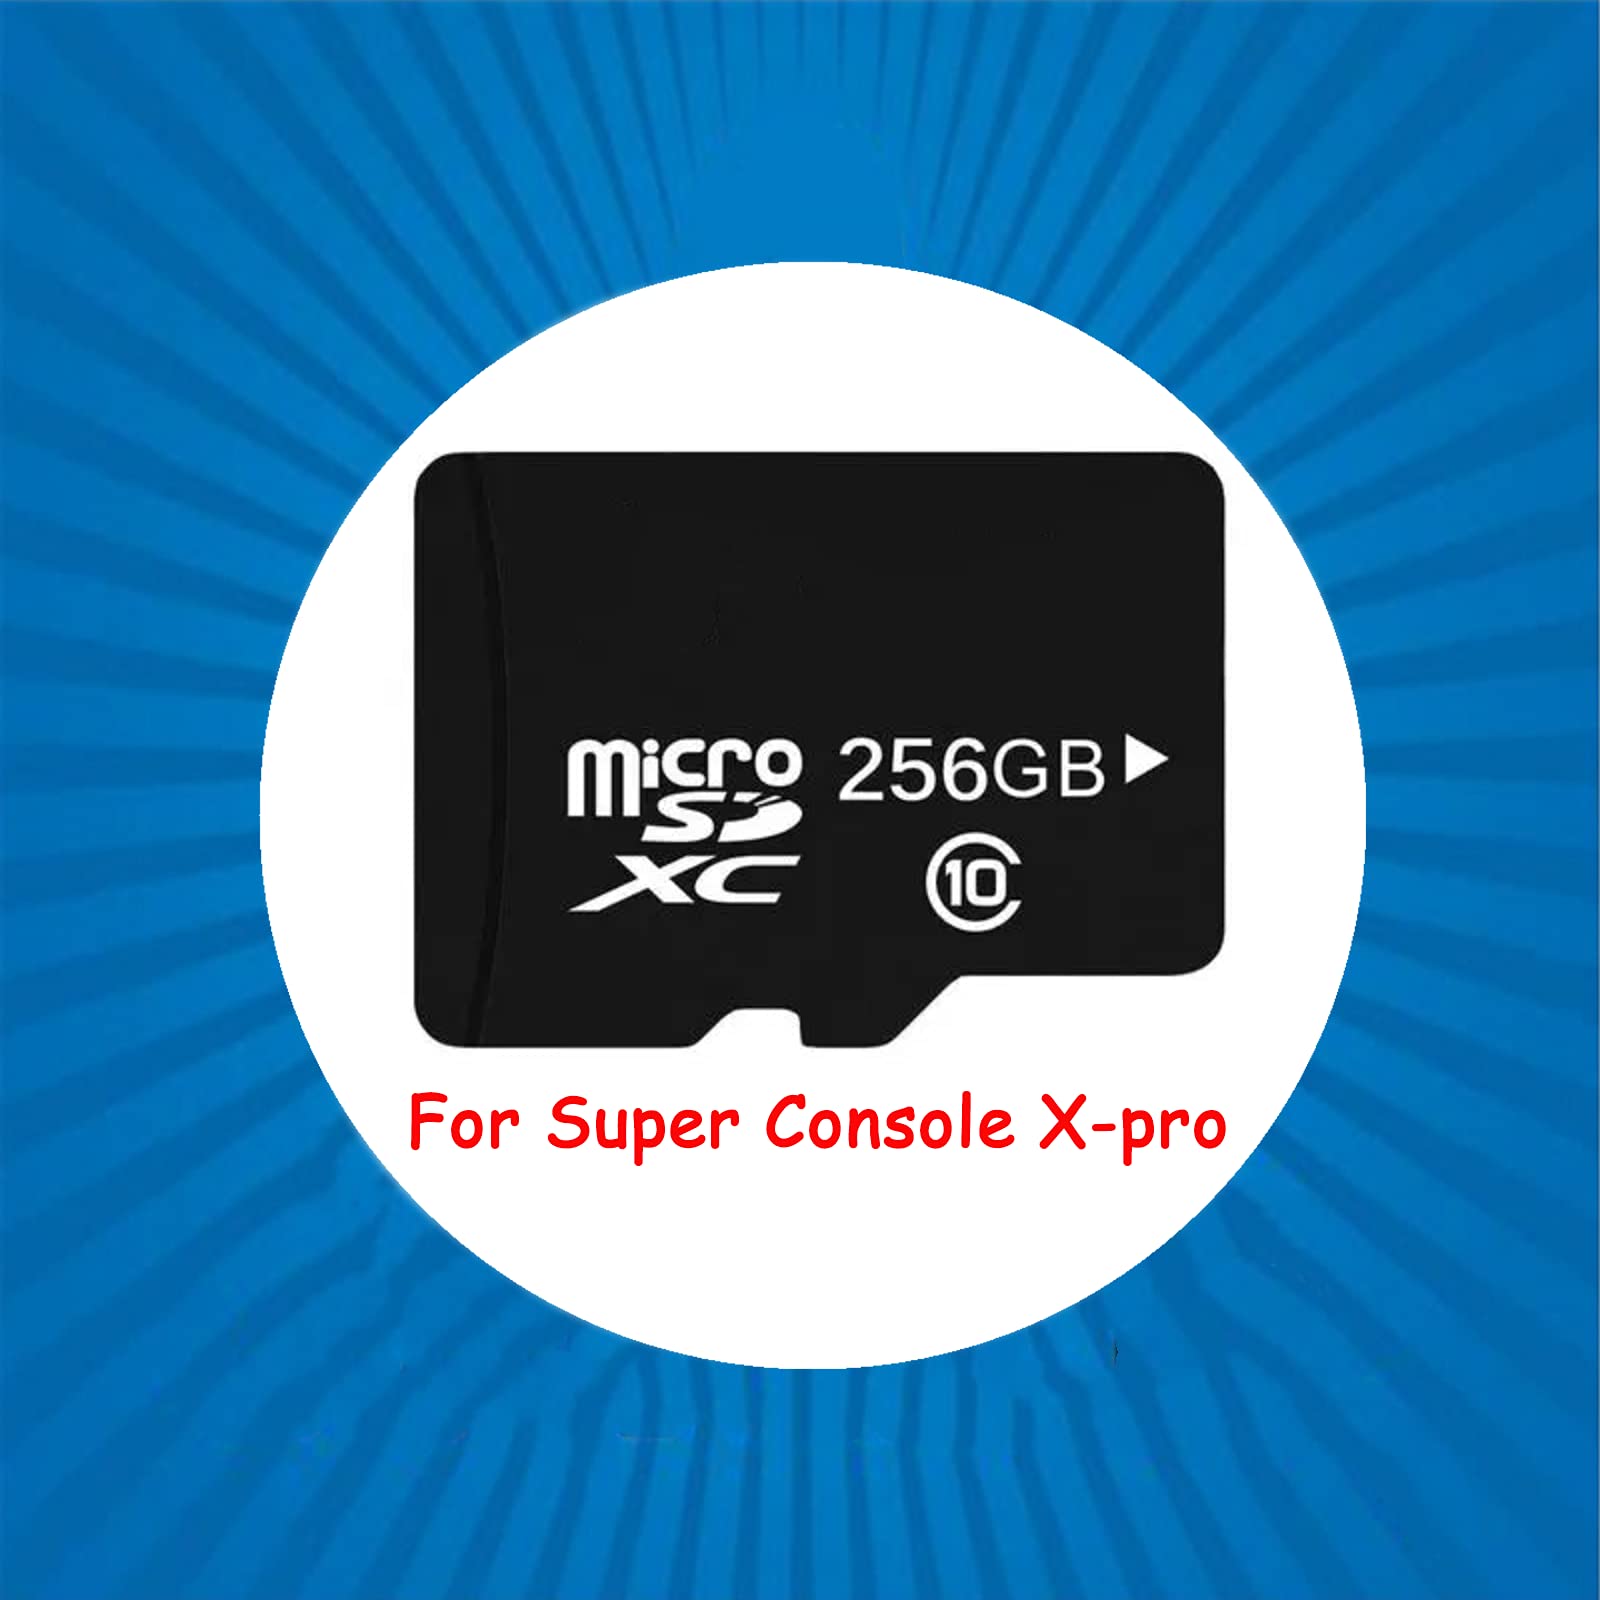 ARCADORA 256GB SD Card for Super Console X-pro, Same As The Original SD Card, Built in 48 Emulators with 50,000+ Games,TV & Game Systems in 1